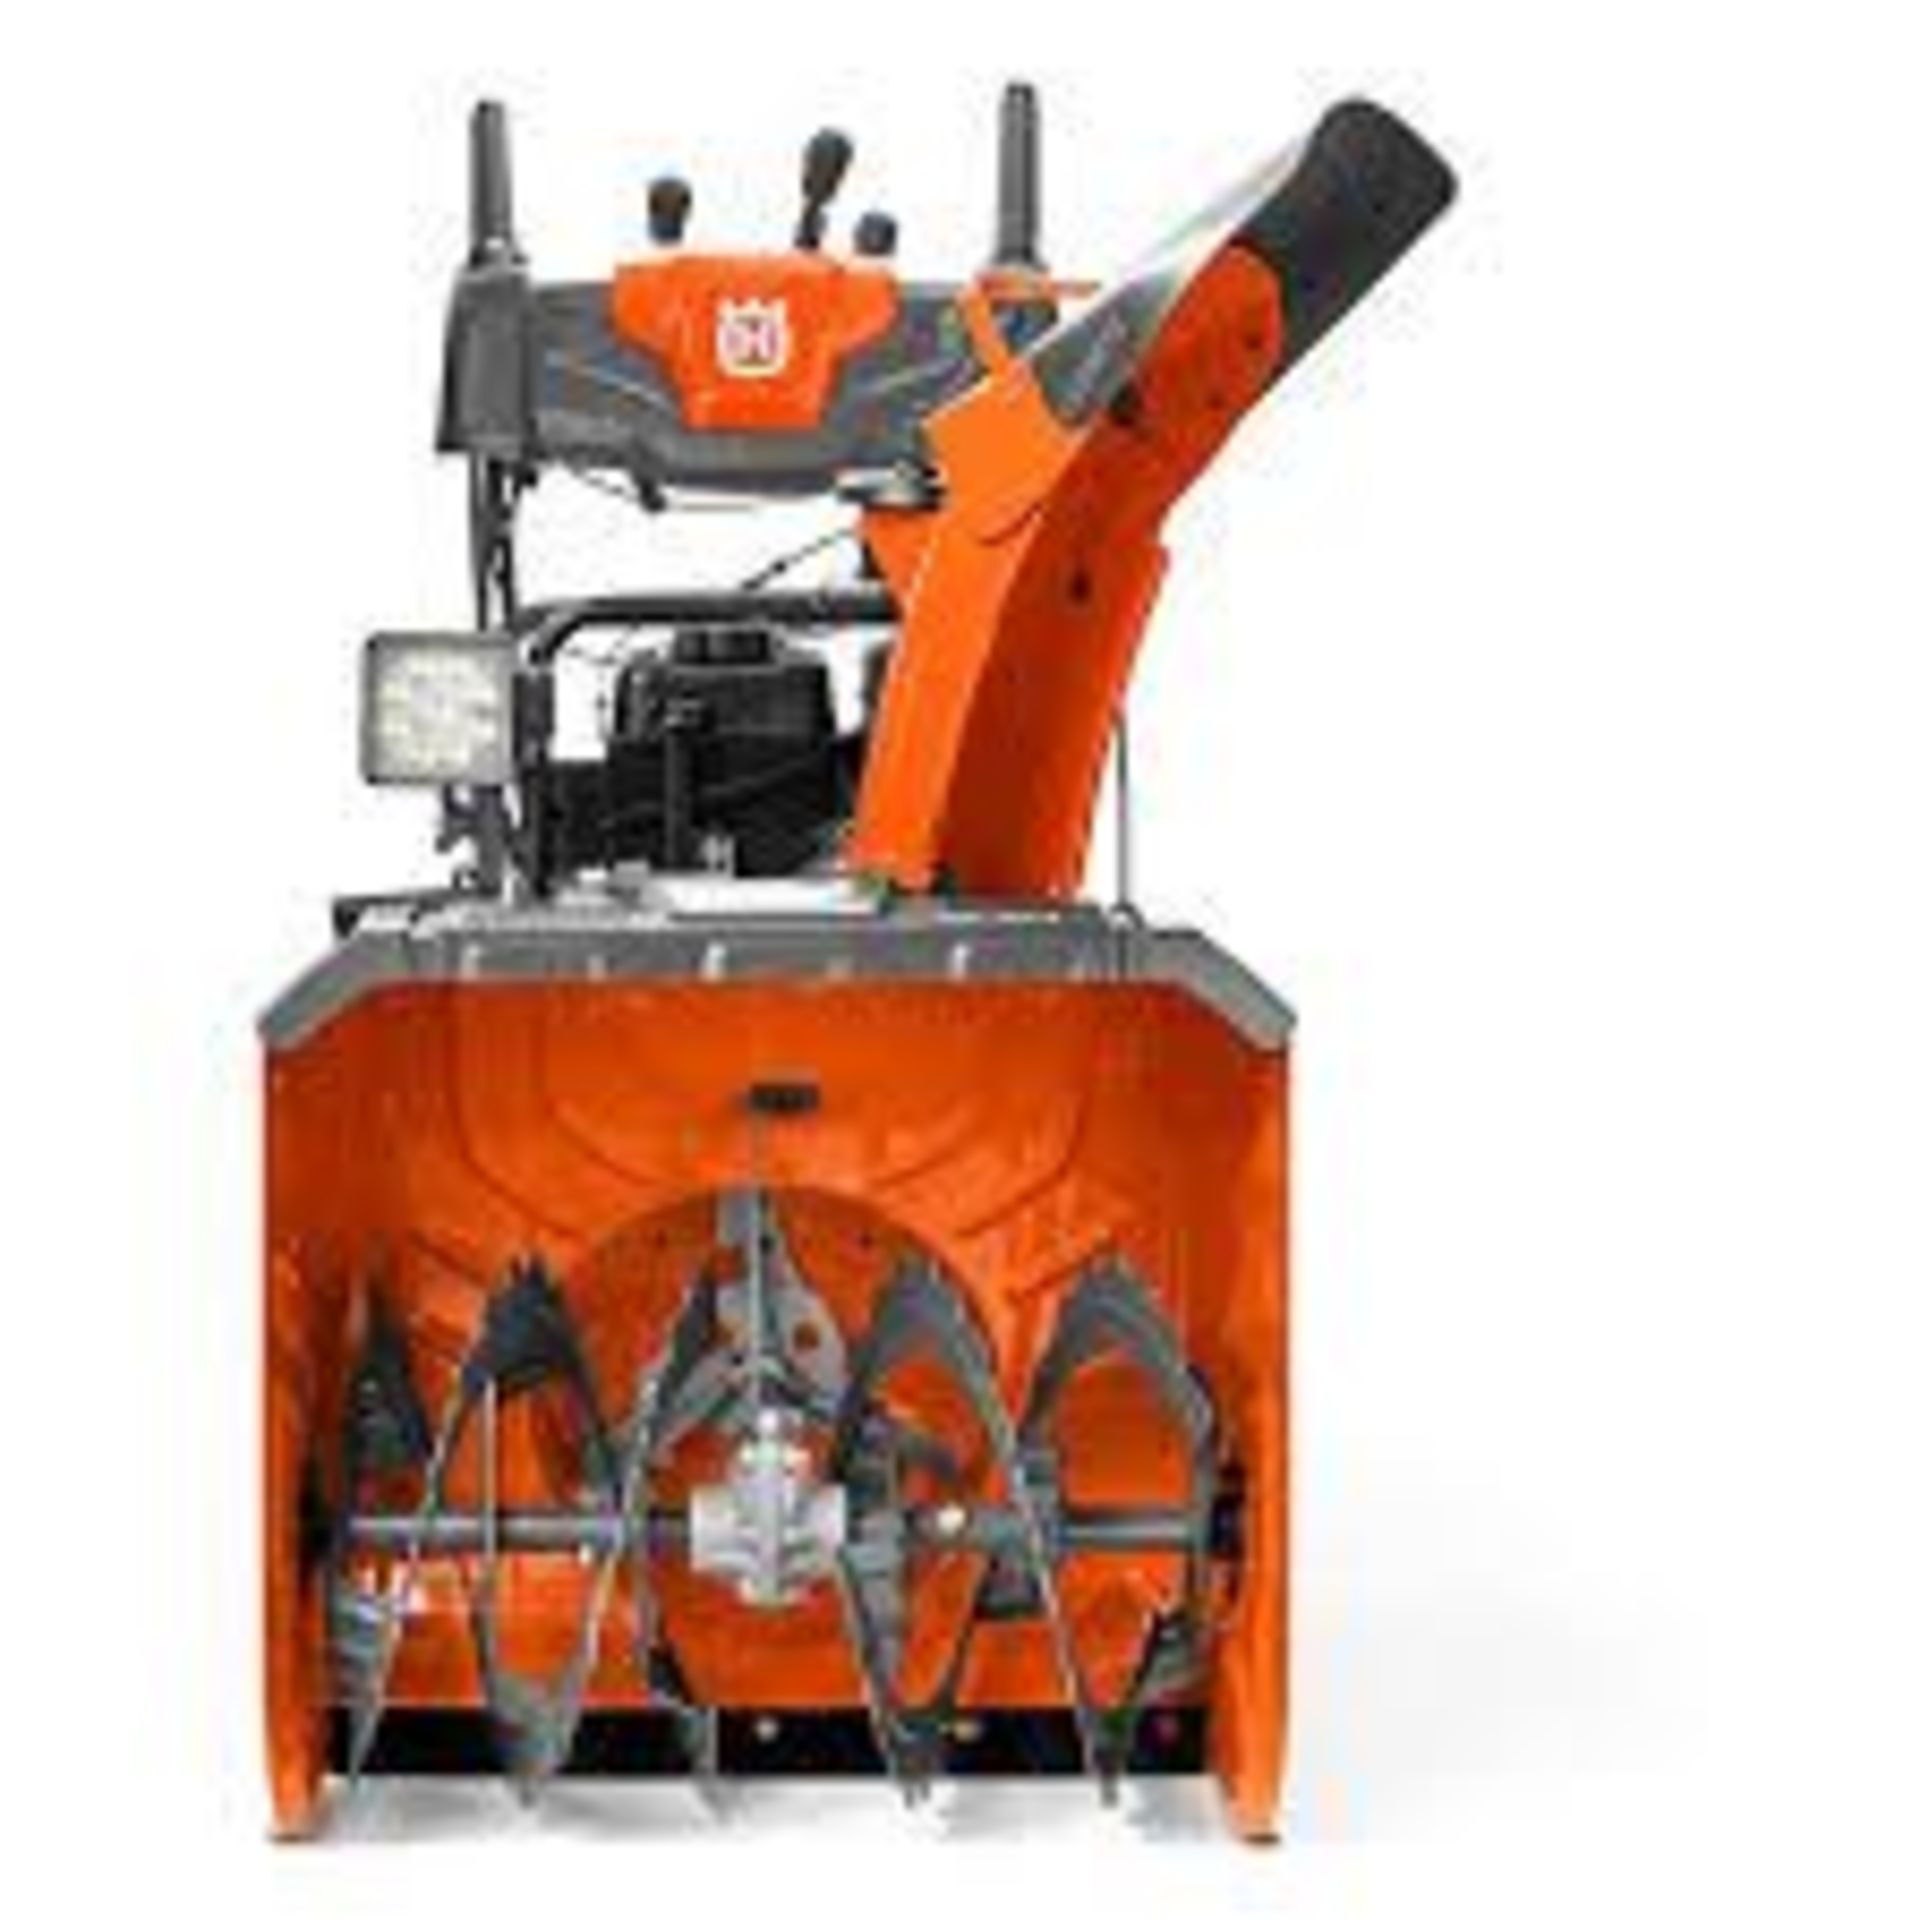 Husqvarna ST 324 Self Propelled Snow Blower- Approx. MSRP $1299 - Image 3 of 5